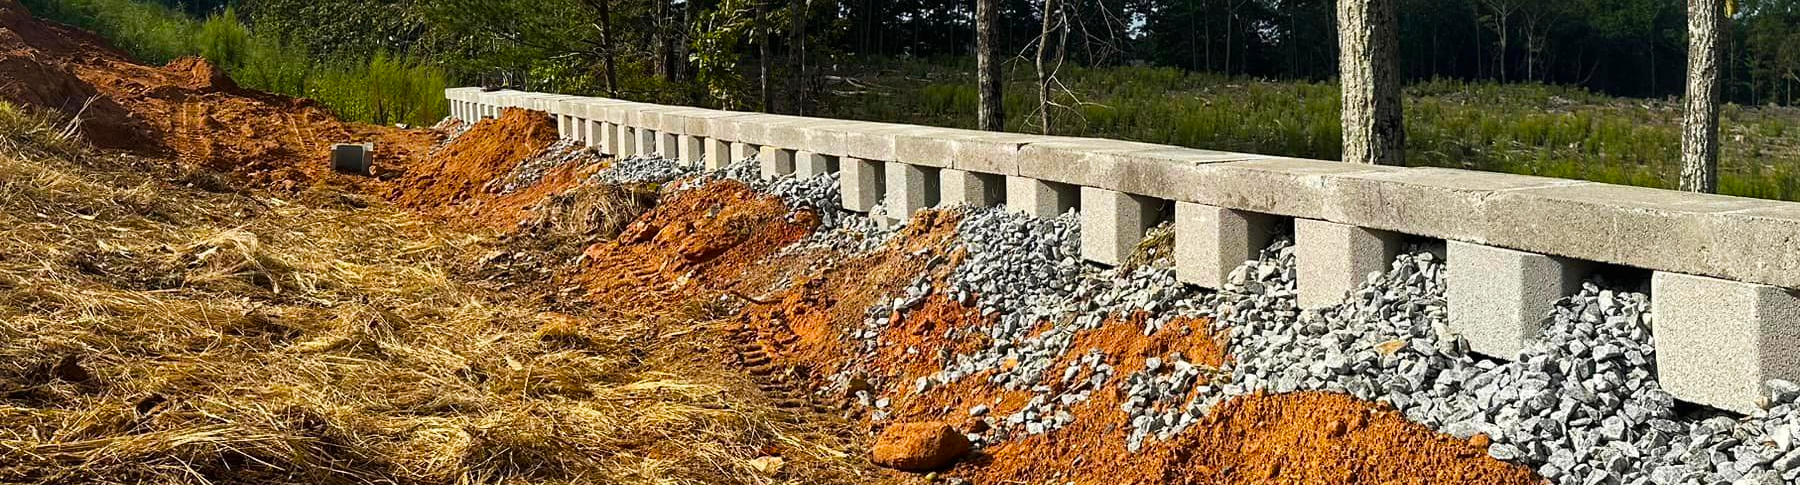 Retaining Wall Contractor Greenville